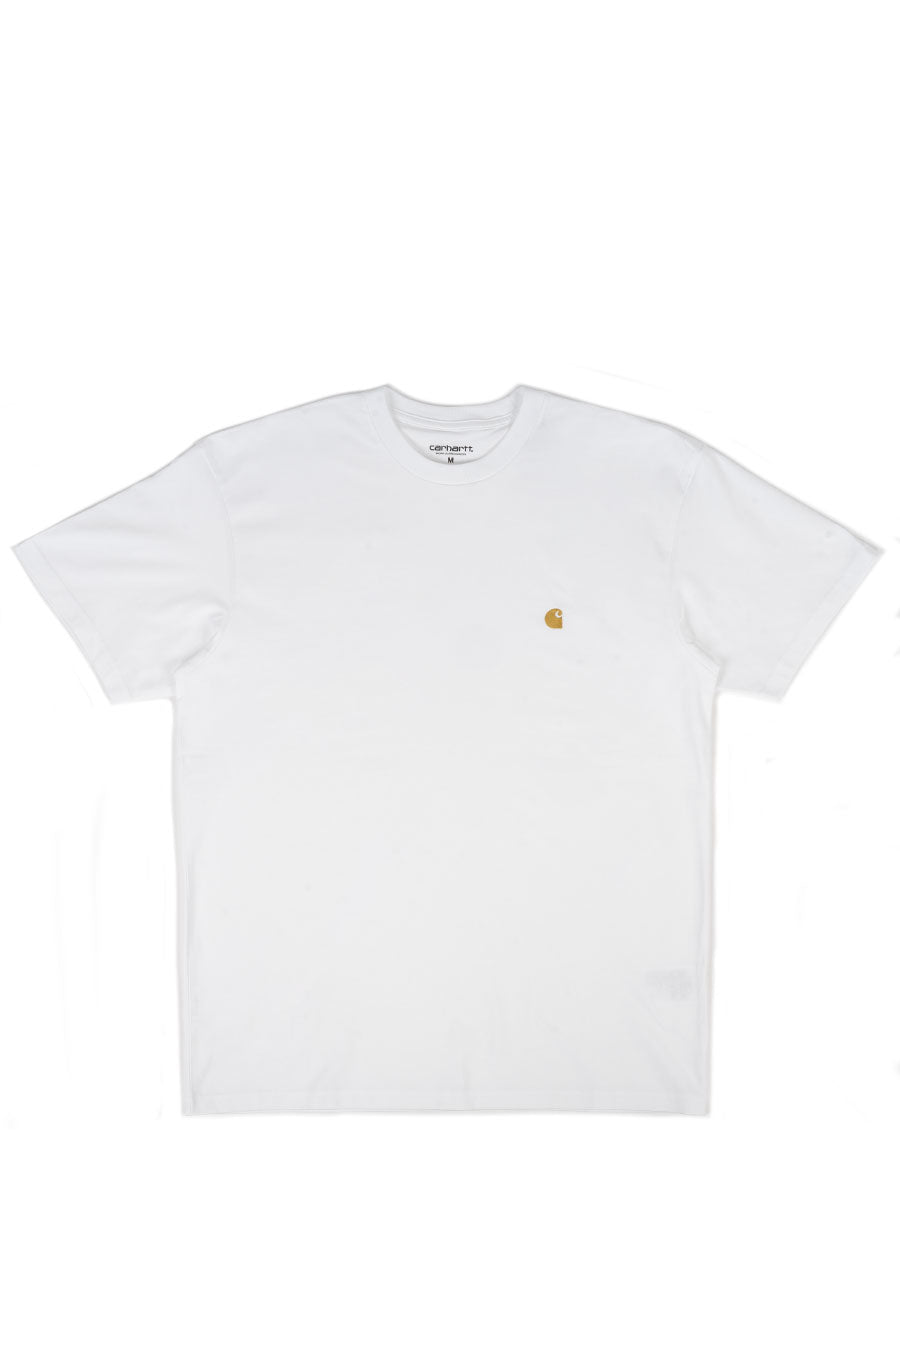 CARHARTT WIP CHASE S/S T-SHIRT WHITE GOLD